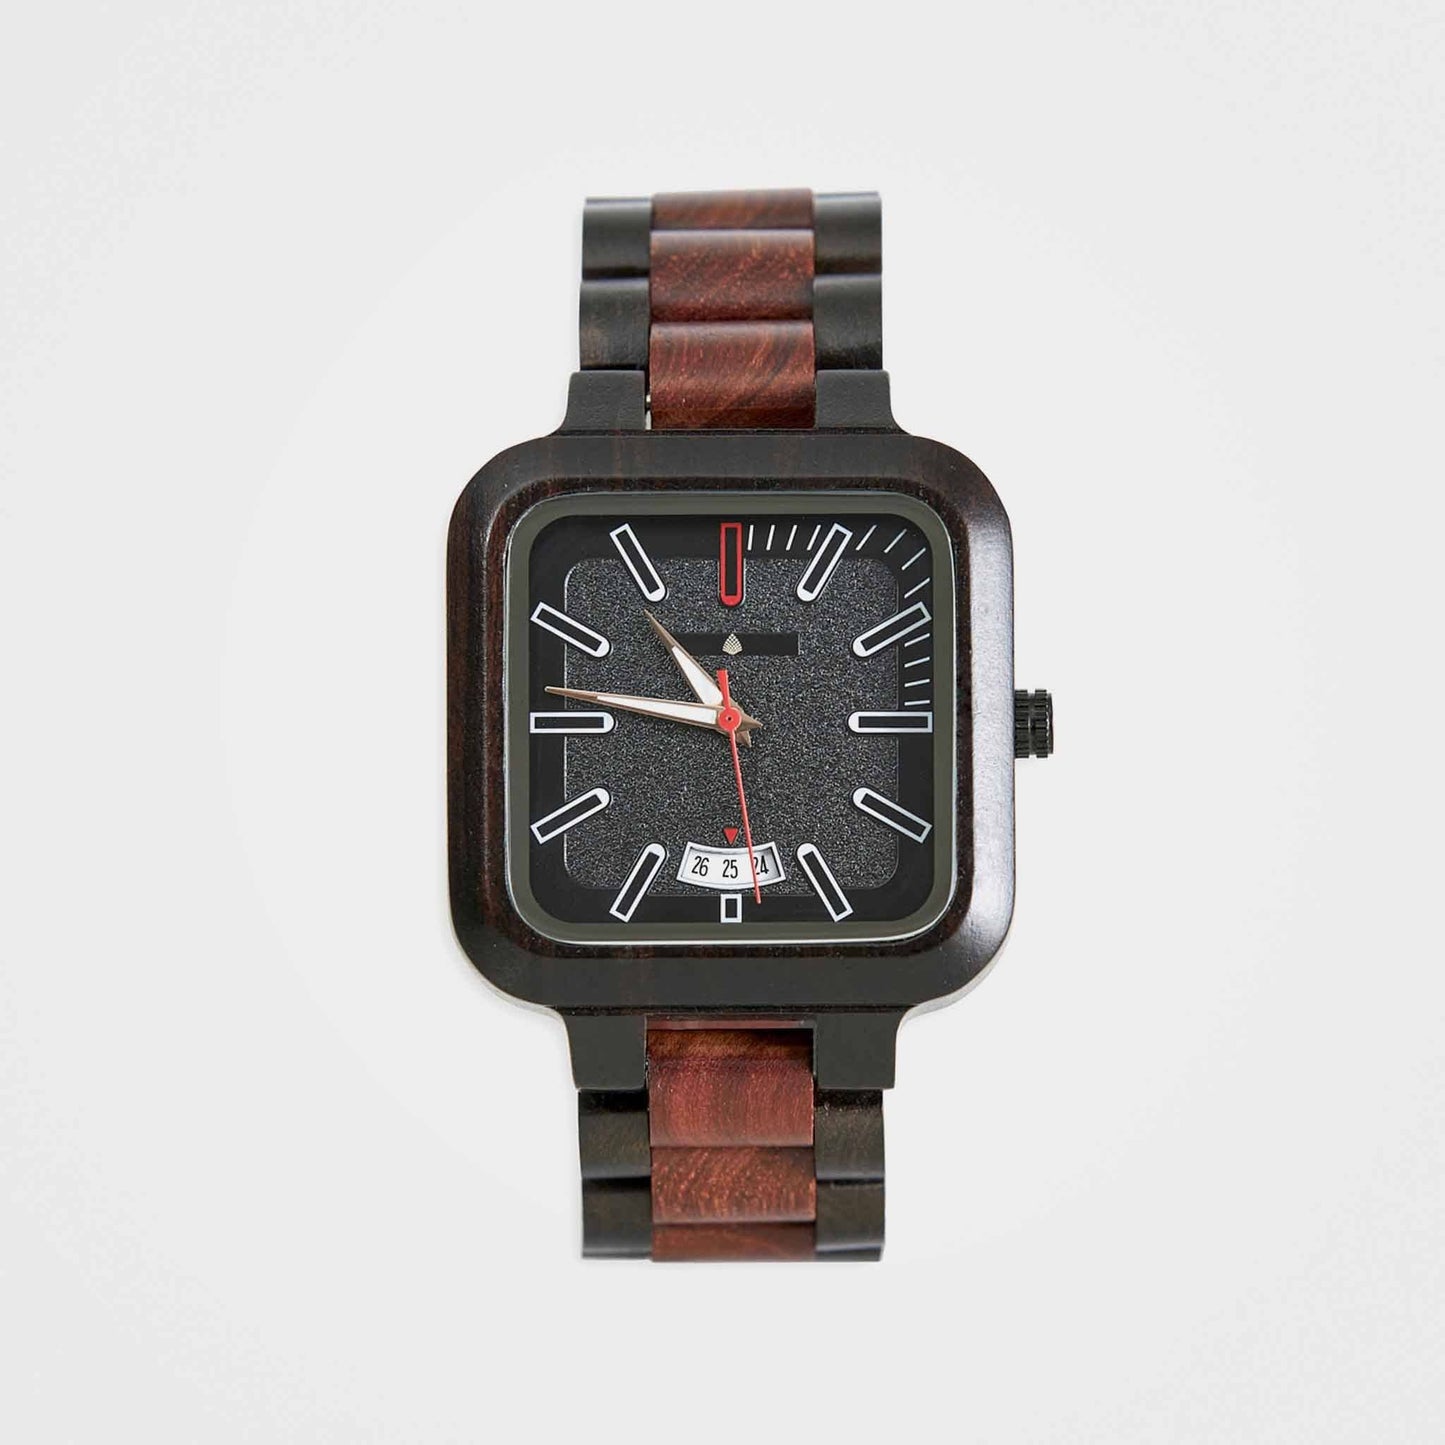 Handmade Wooden Wristwatch For Men: The Hickory